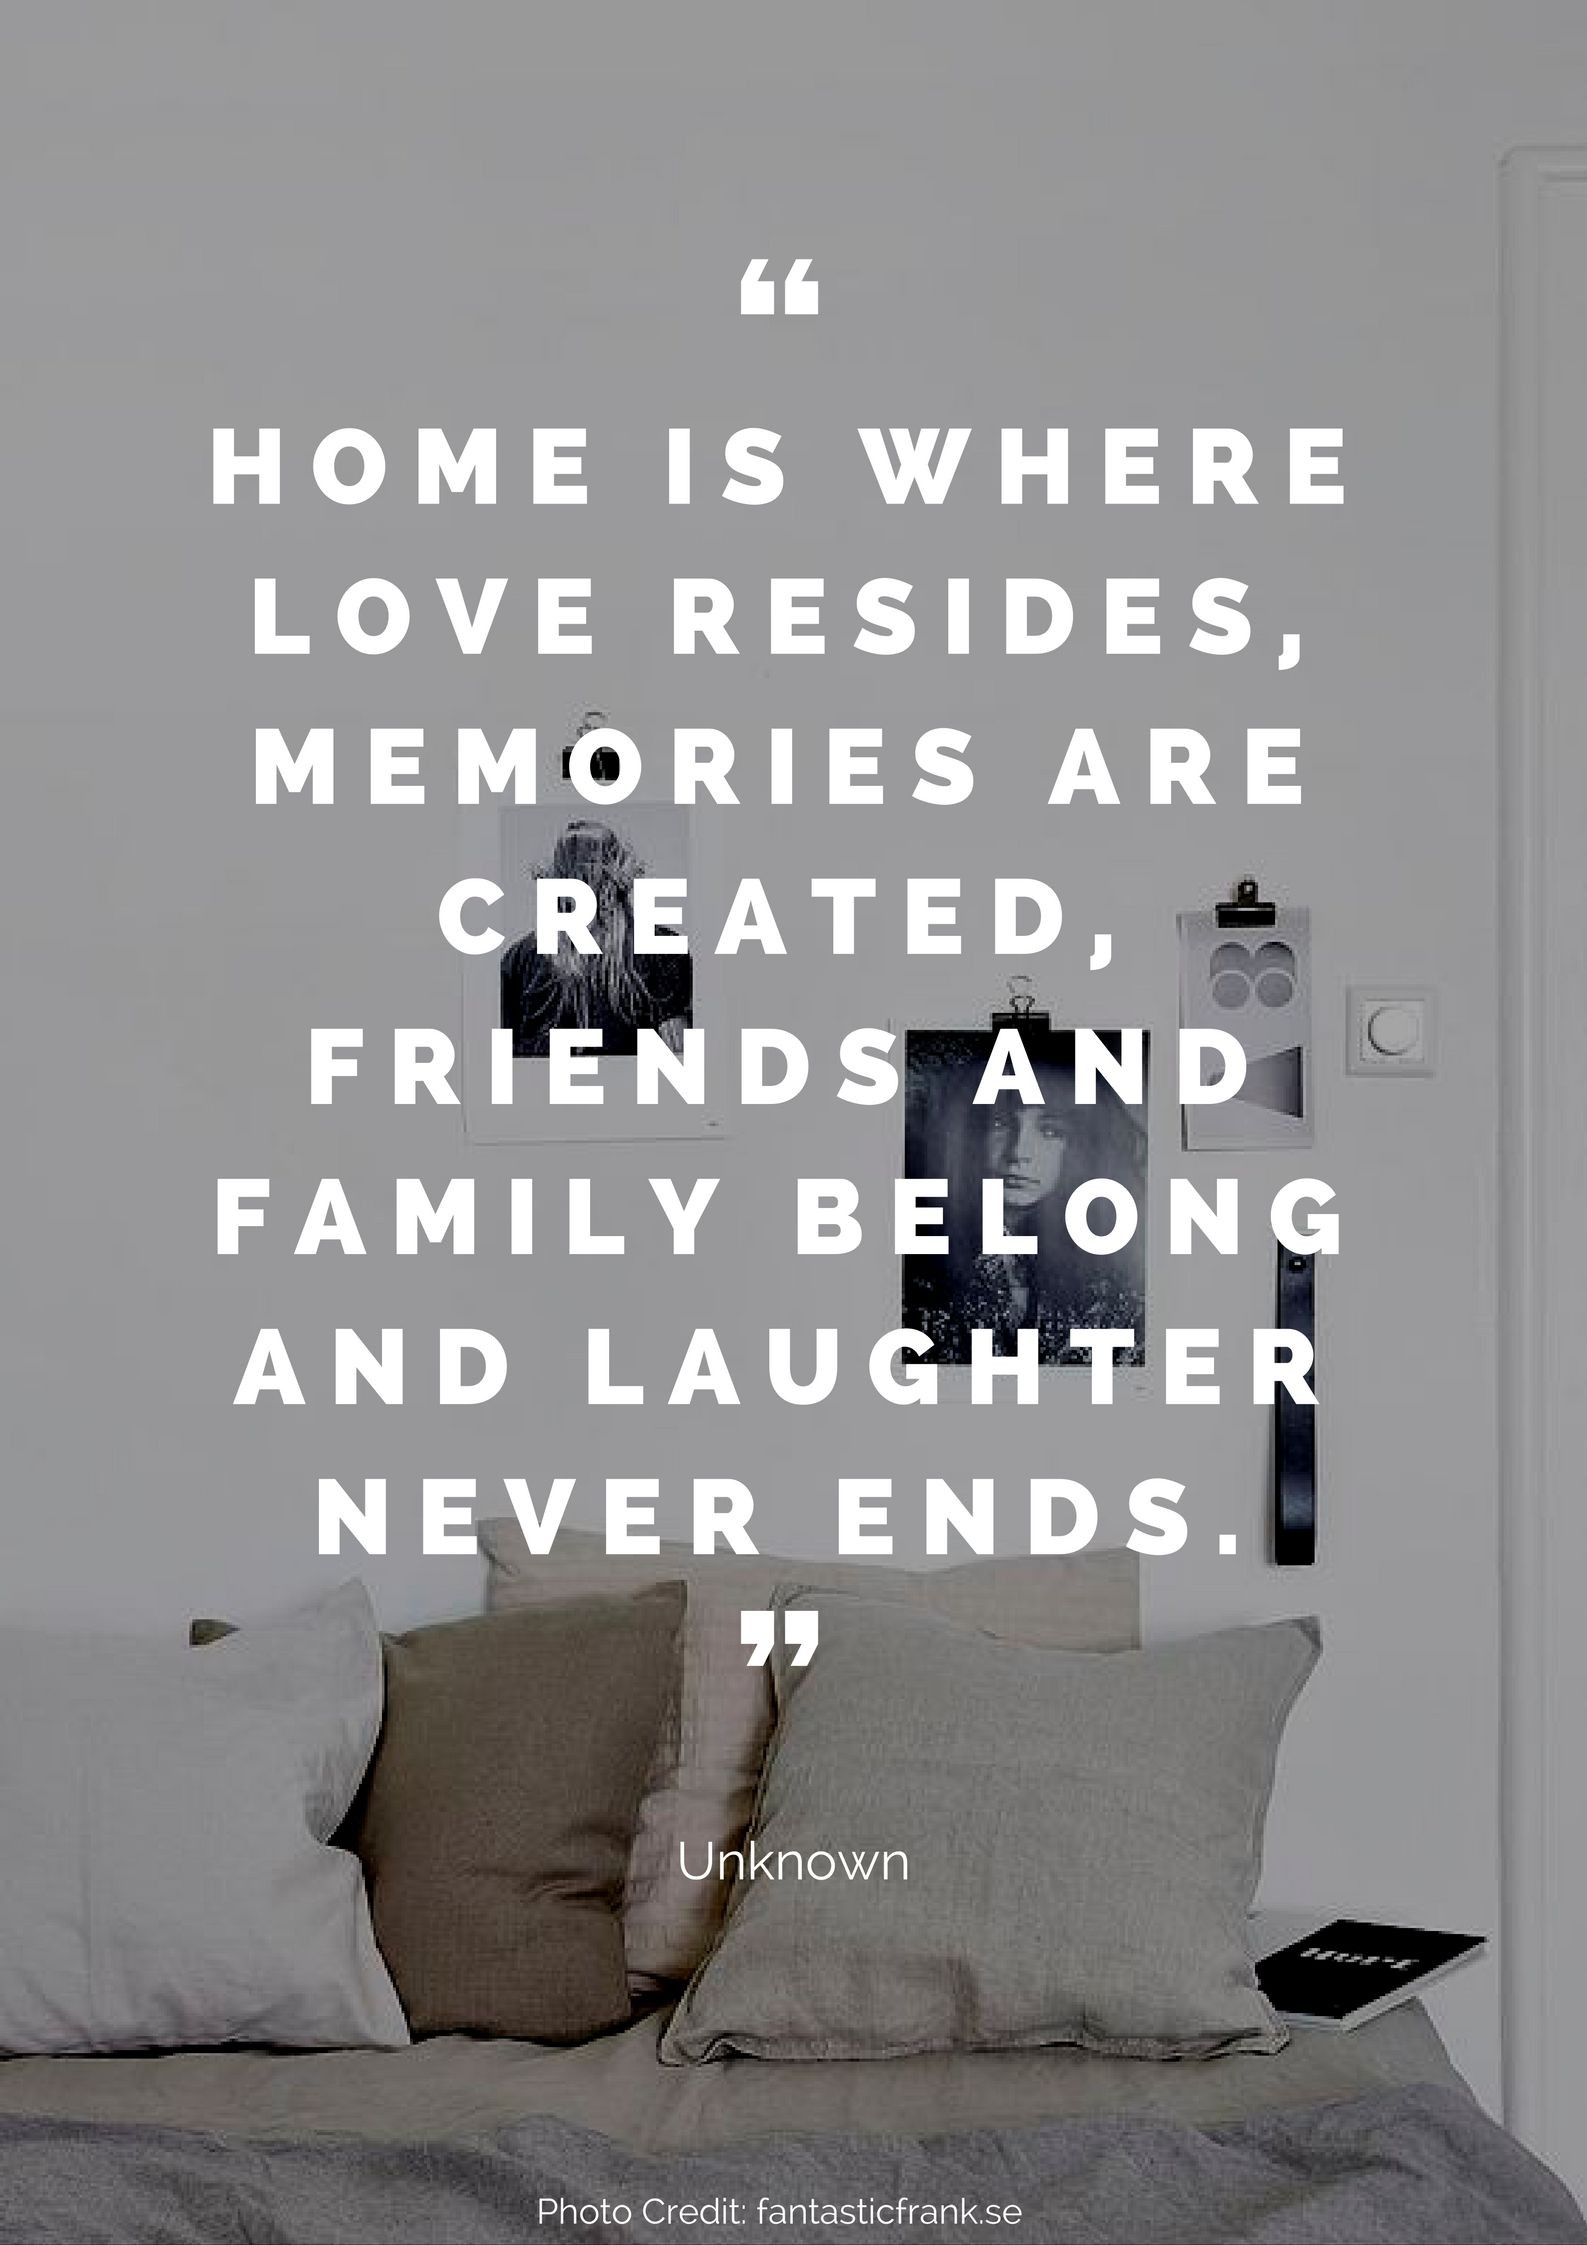 Inspirational Quotes About Home
 36 Beautiful Quotes About Home